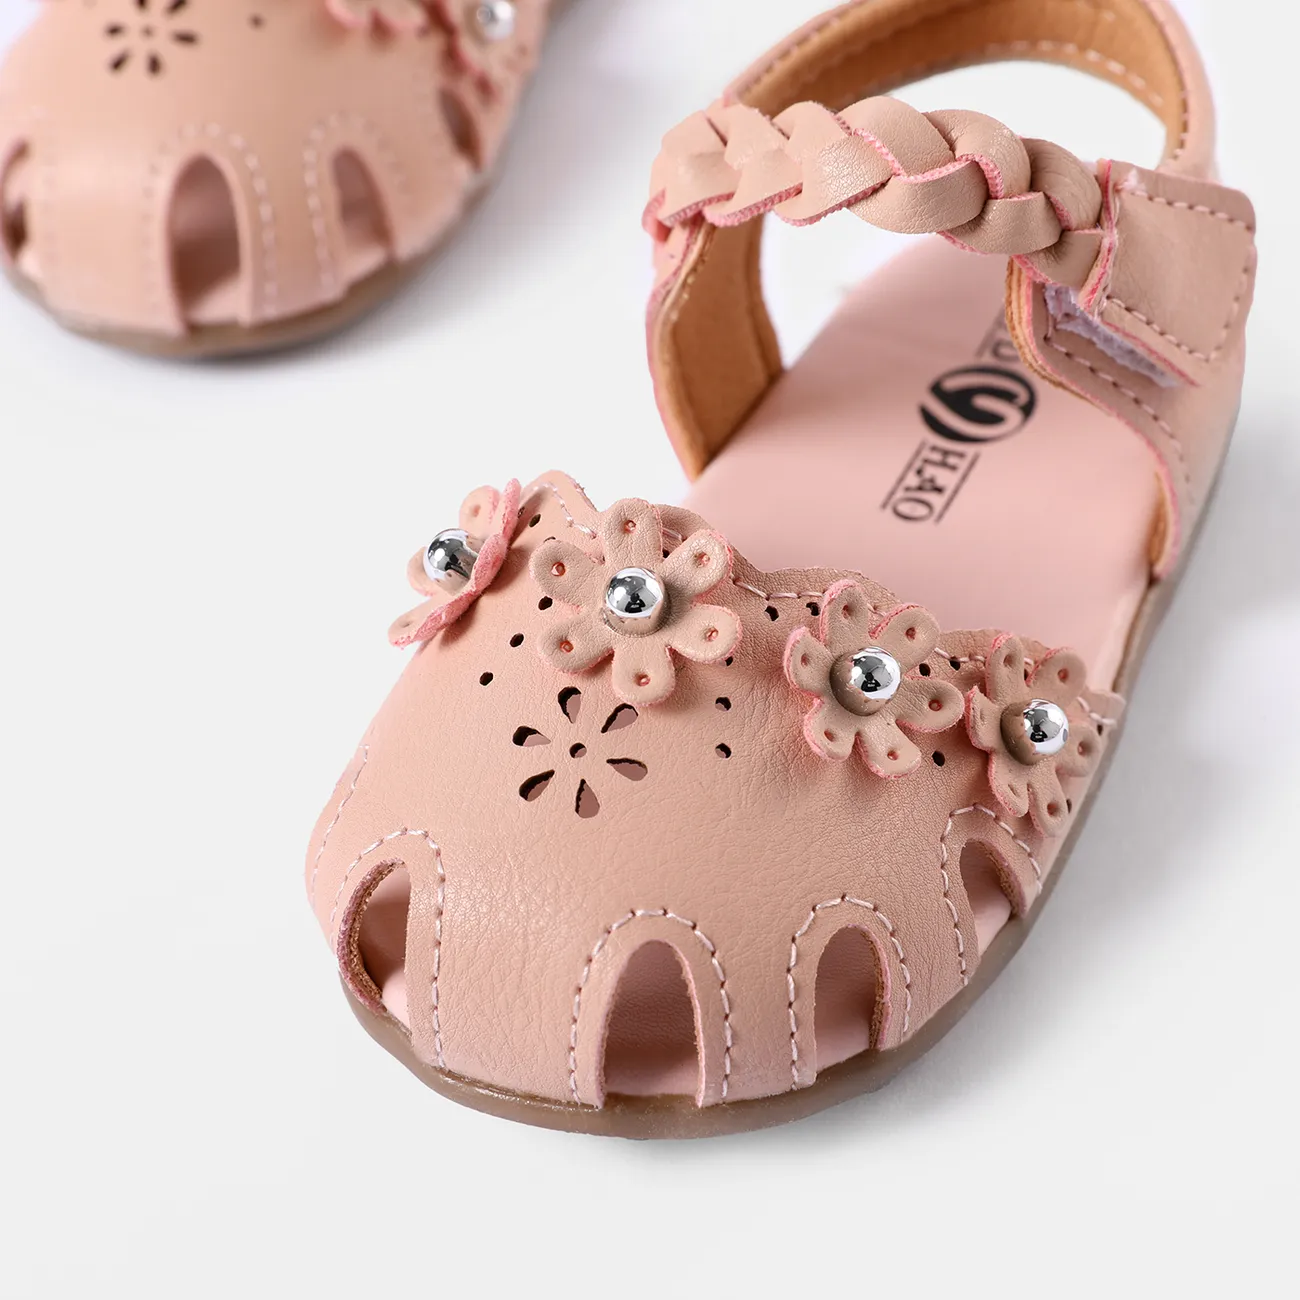 Toddler / Kid Floral Decor Braided Detail Sandals (The direction of the braid is random) (Toddler US 4.5-6.5 and Toddler US 7-9 have different soles) Pink big image 1